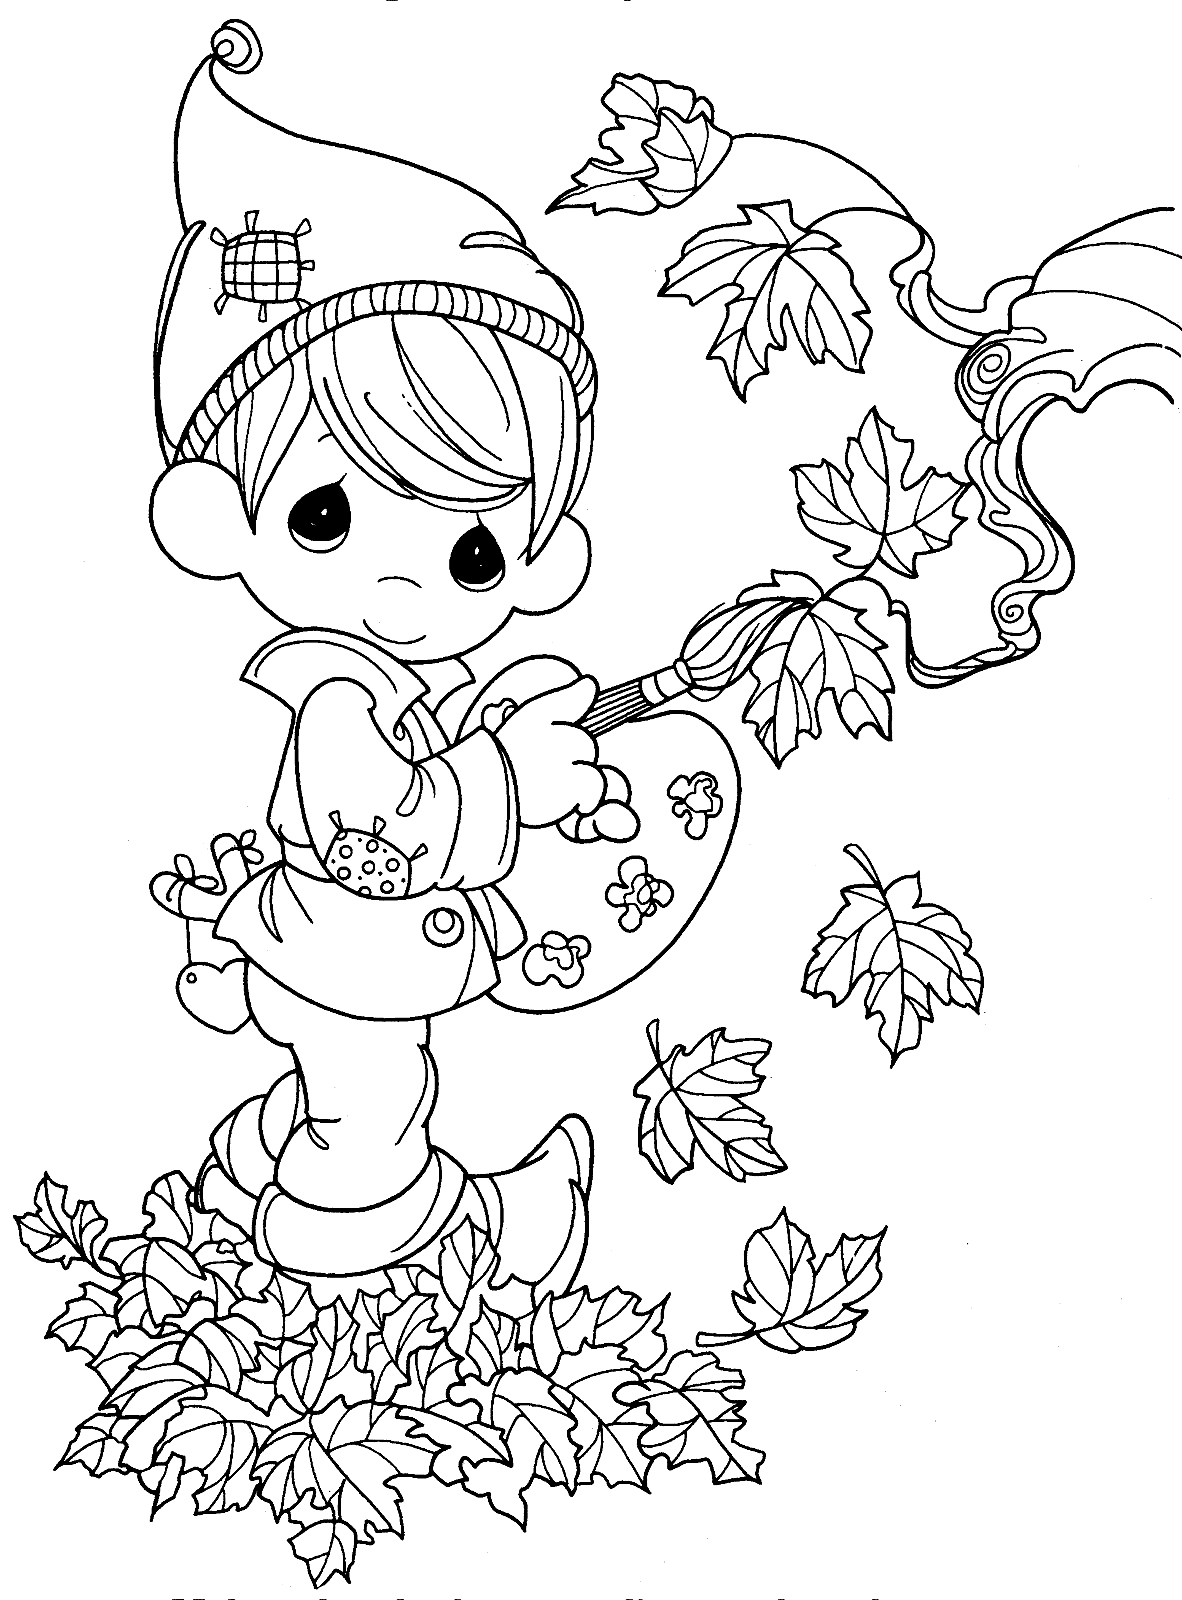 Cute Elf Painting in the Fall Coloring Page